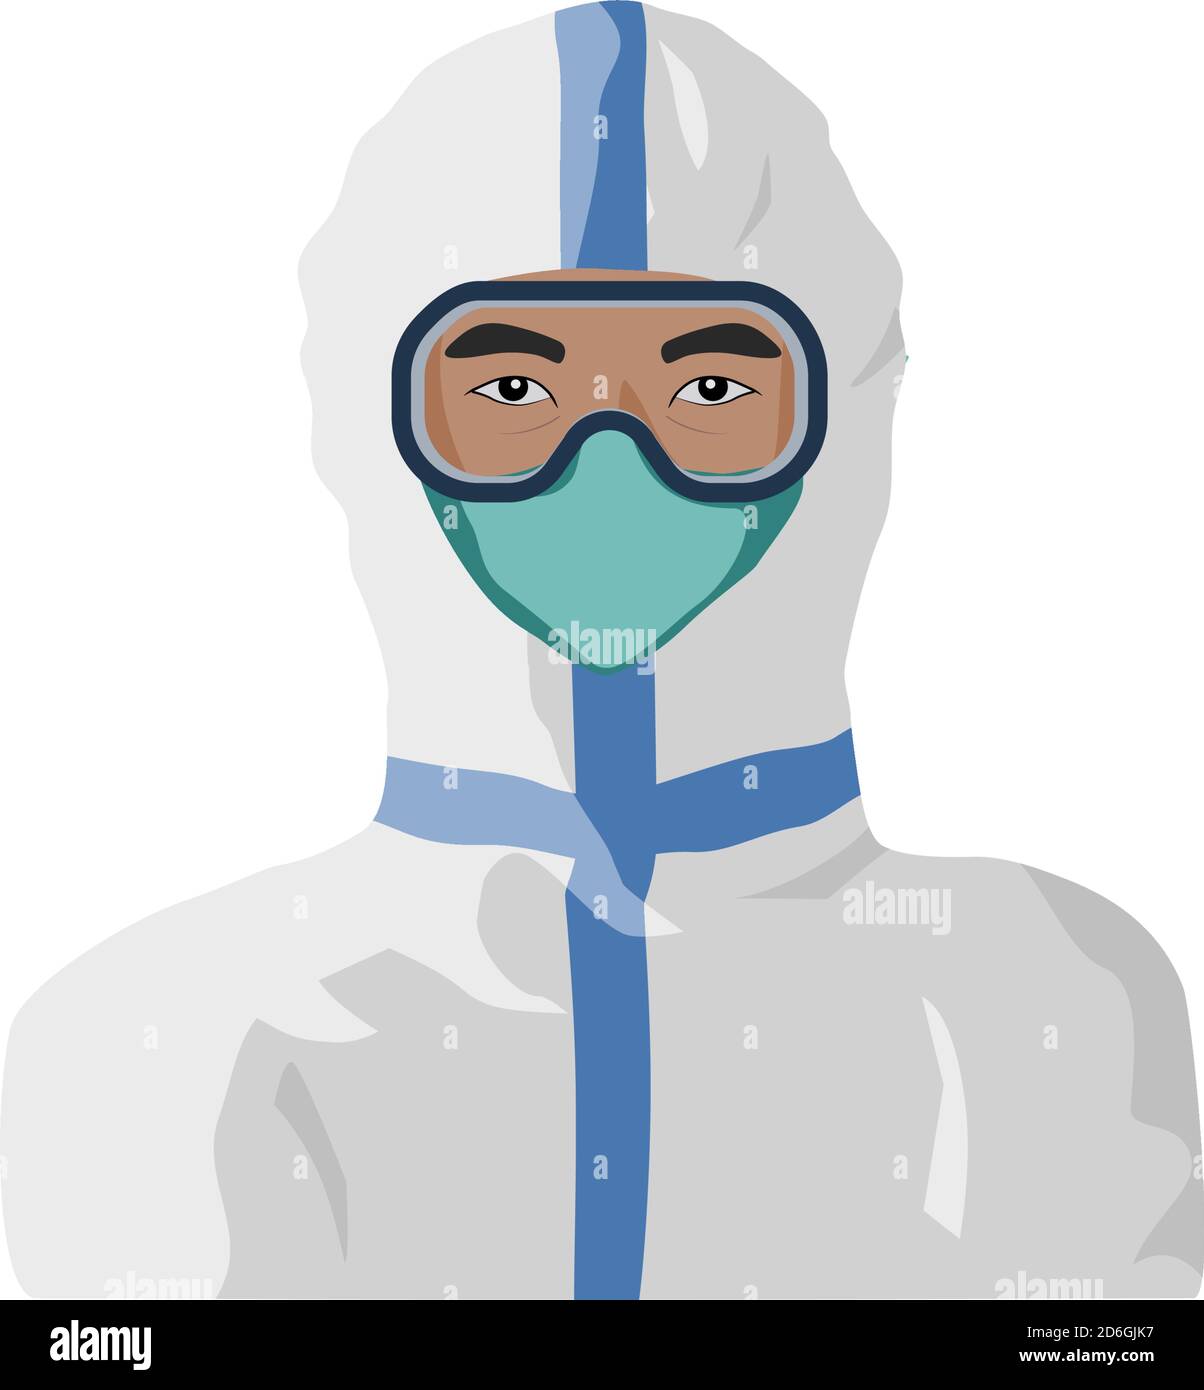 Healthcare personnel wearing PPE, full personal protective equipment.  Asian man portrait illustration. Stock Vector